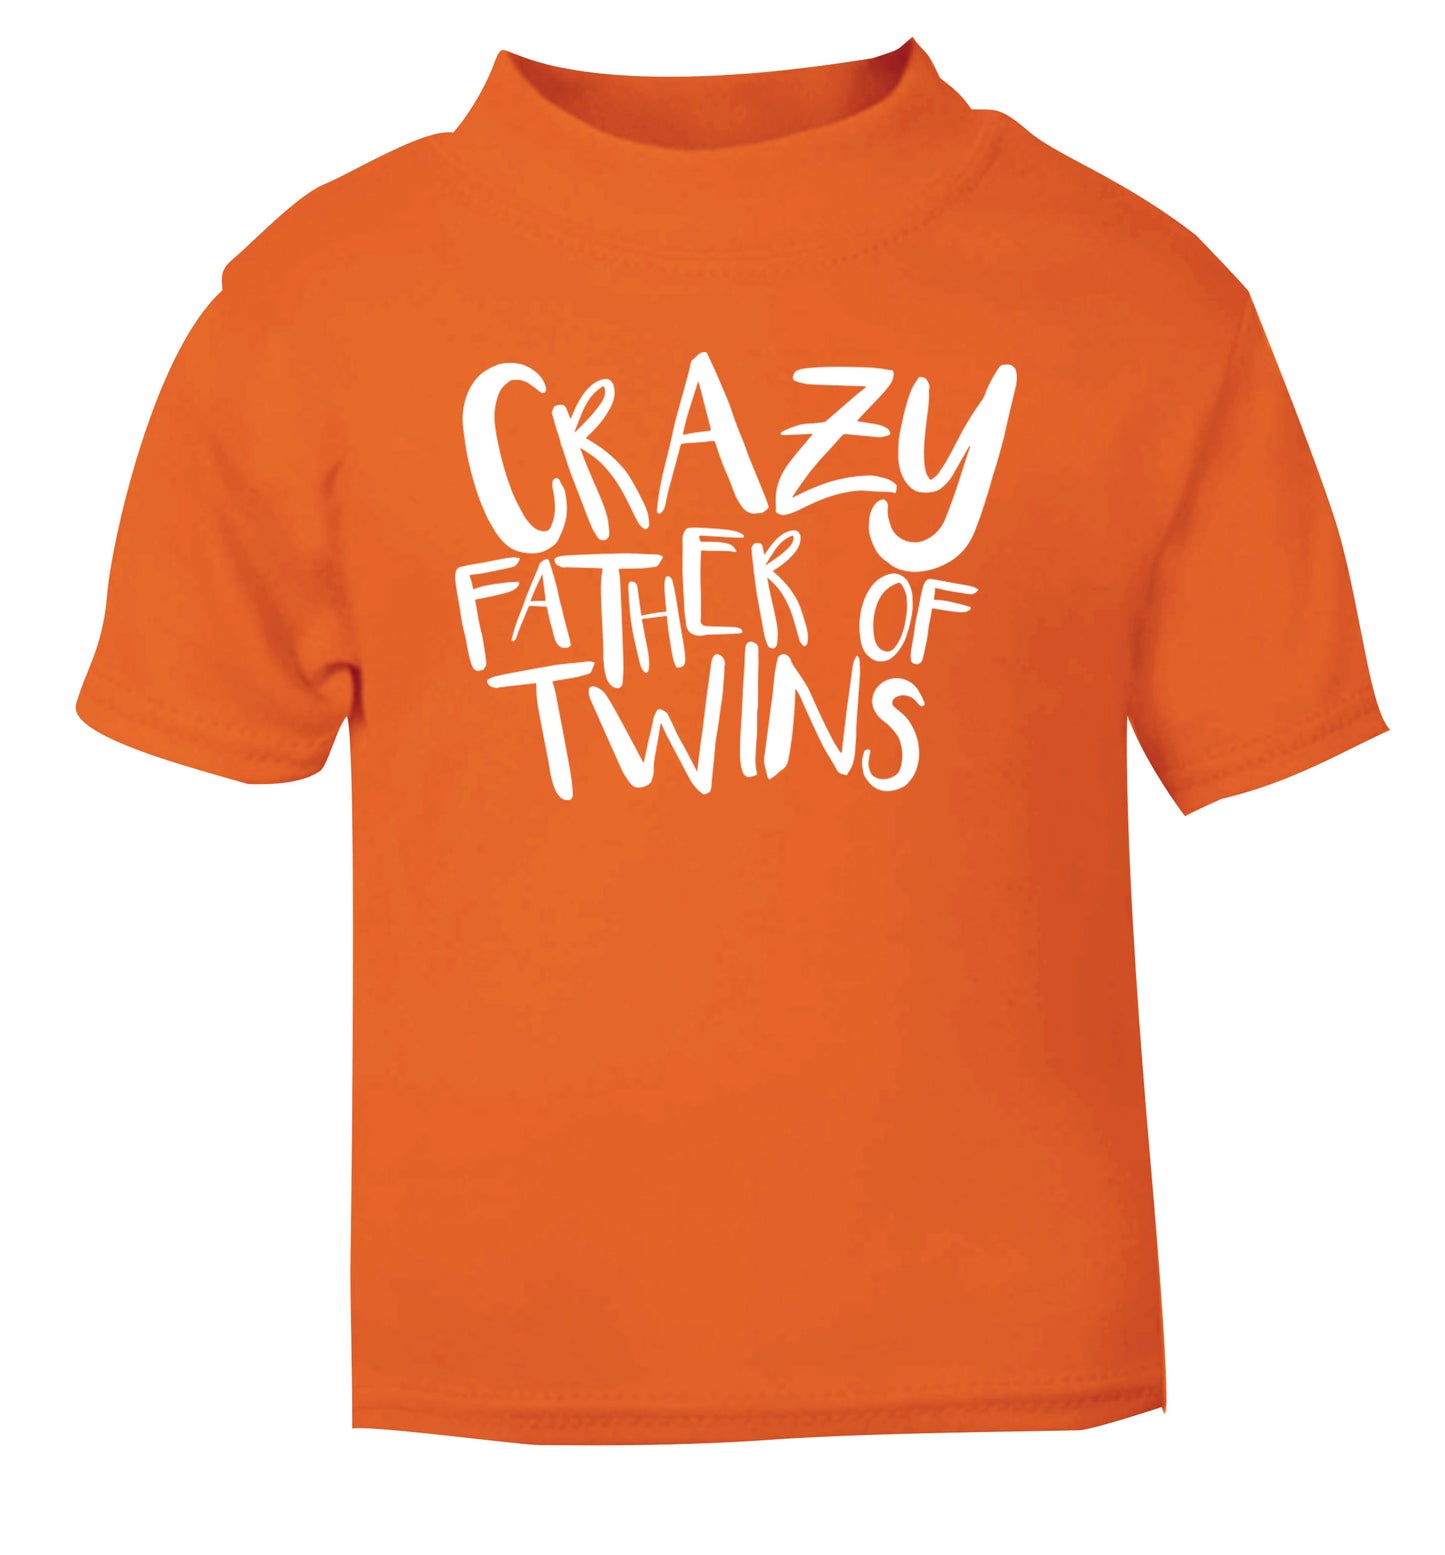 Crazy father of twins orange Baby Toddler Tshirt 2 Years